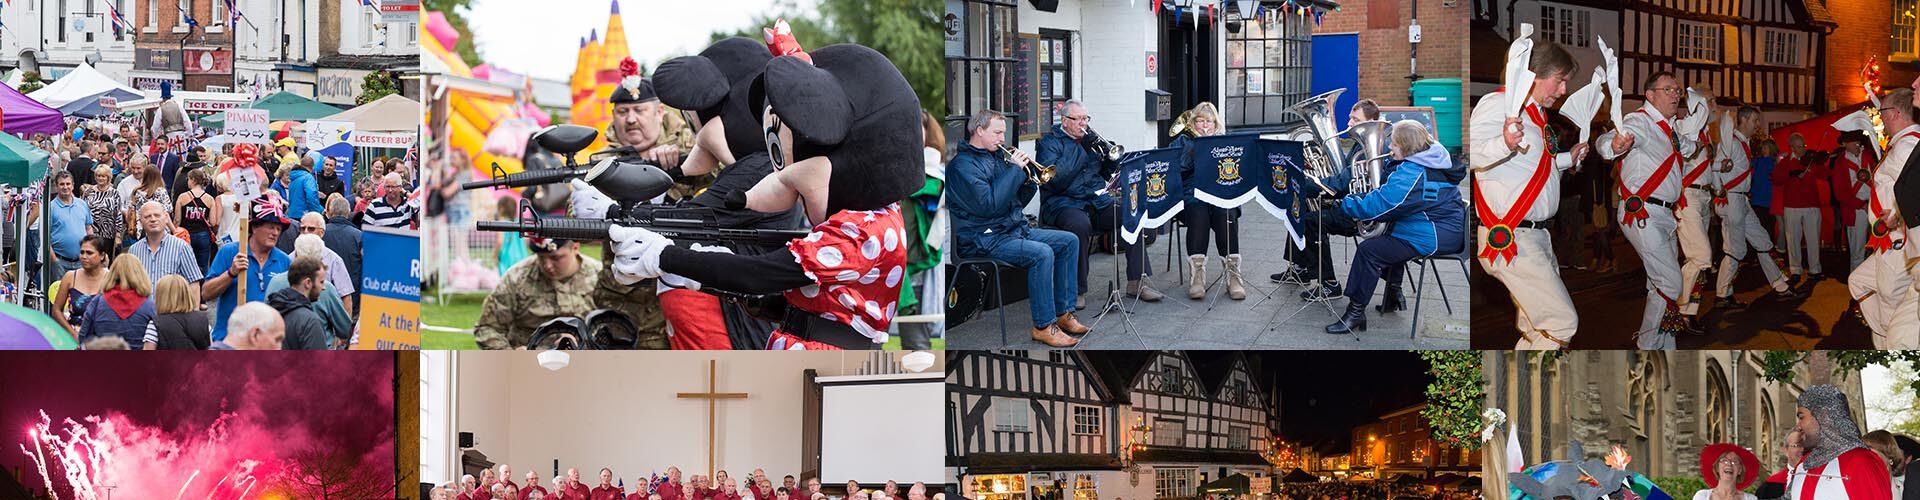 WHAT'S ON IN ALCESTER